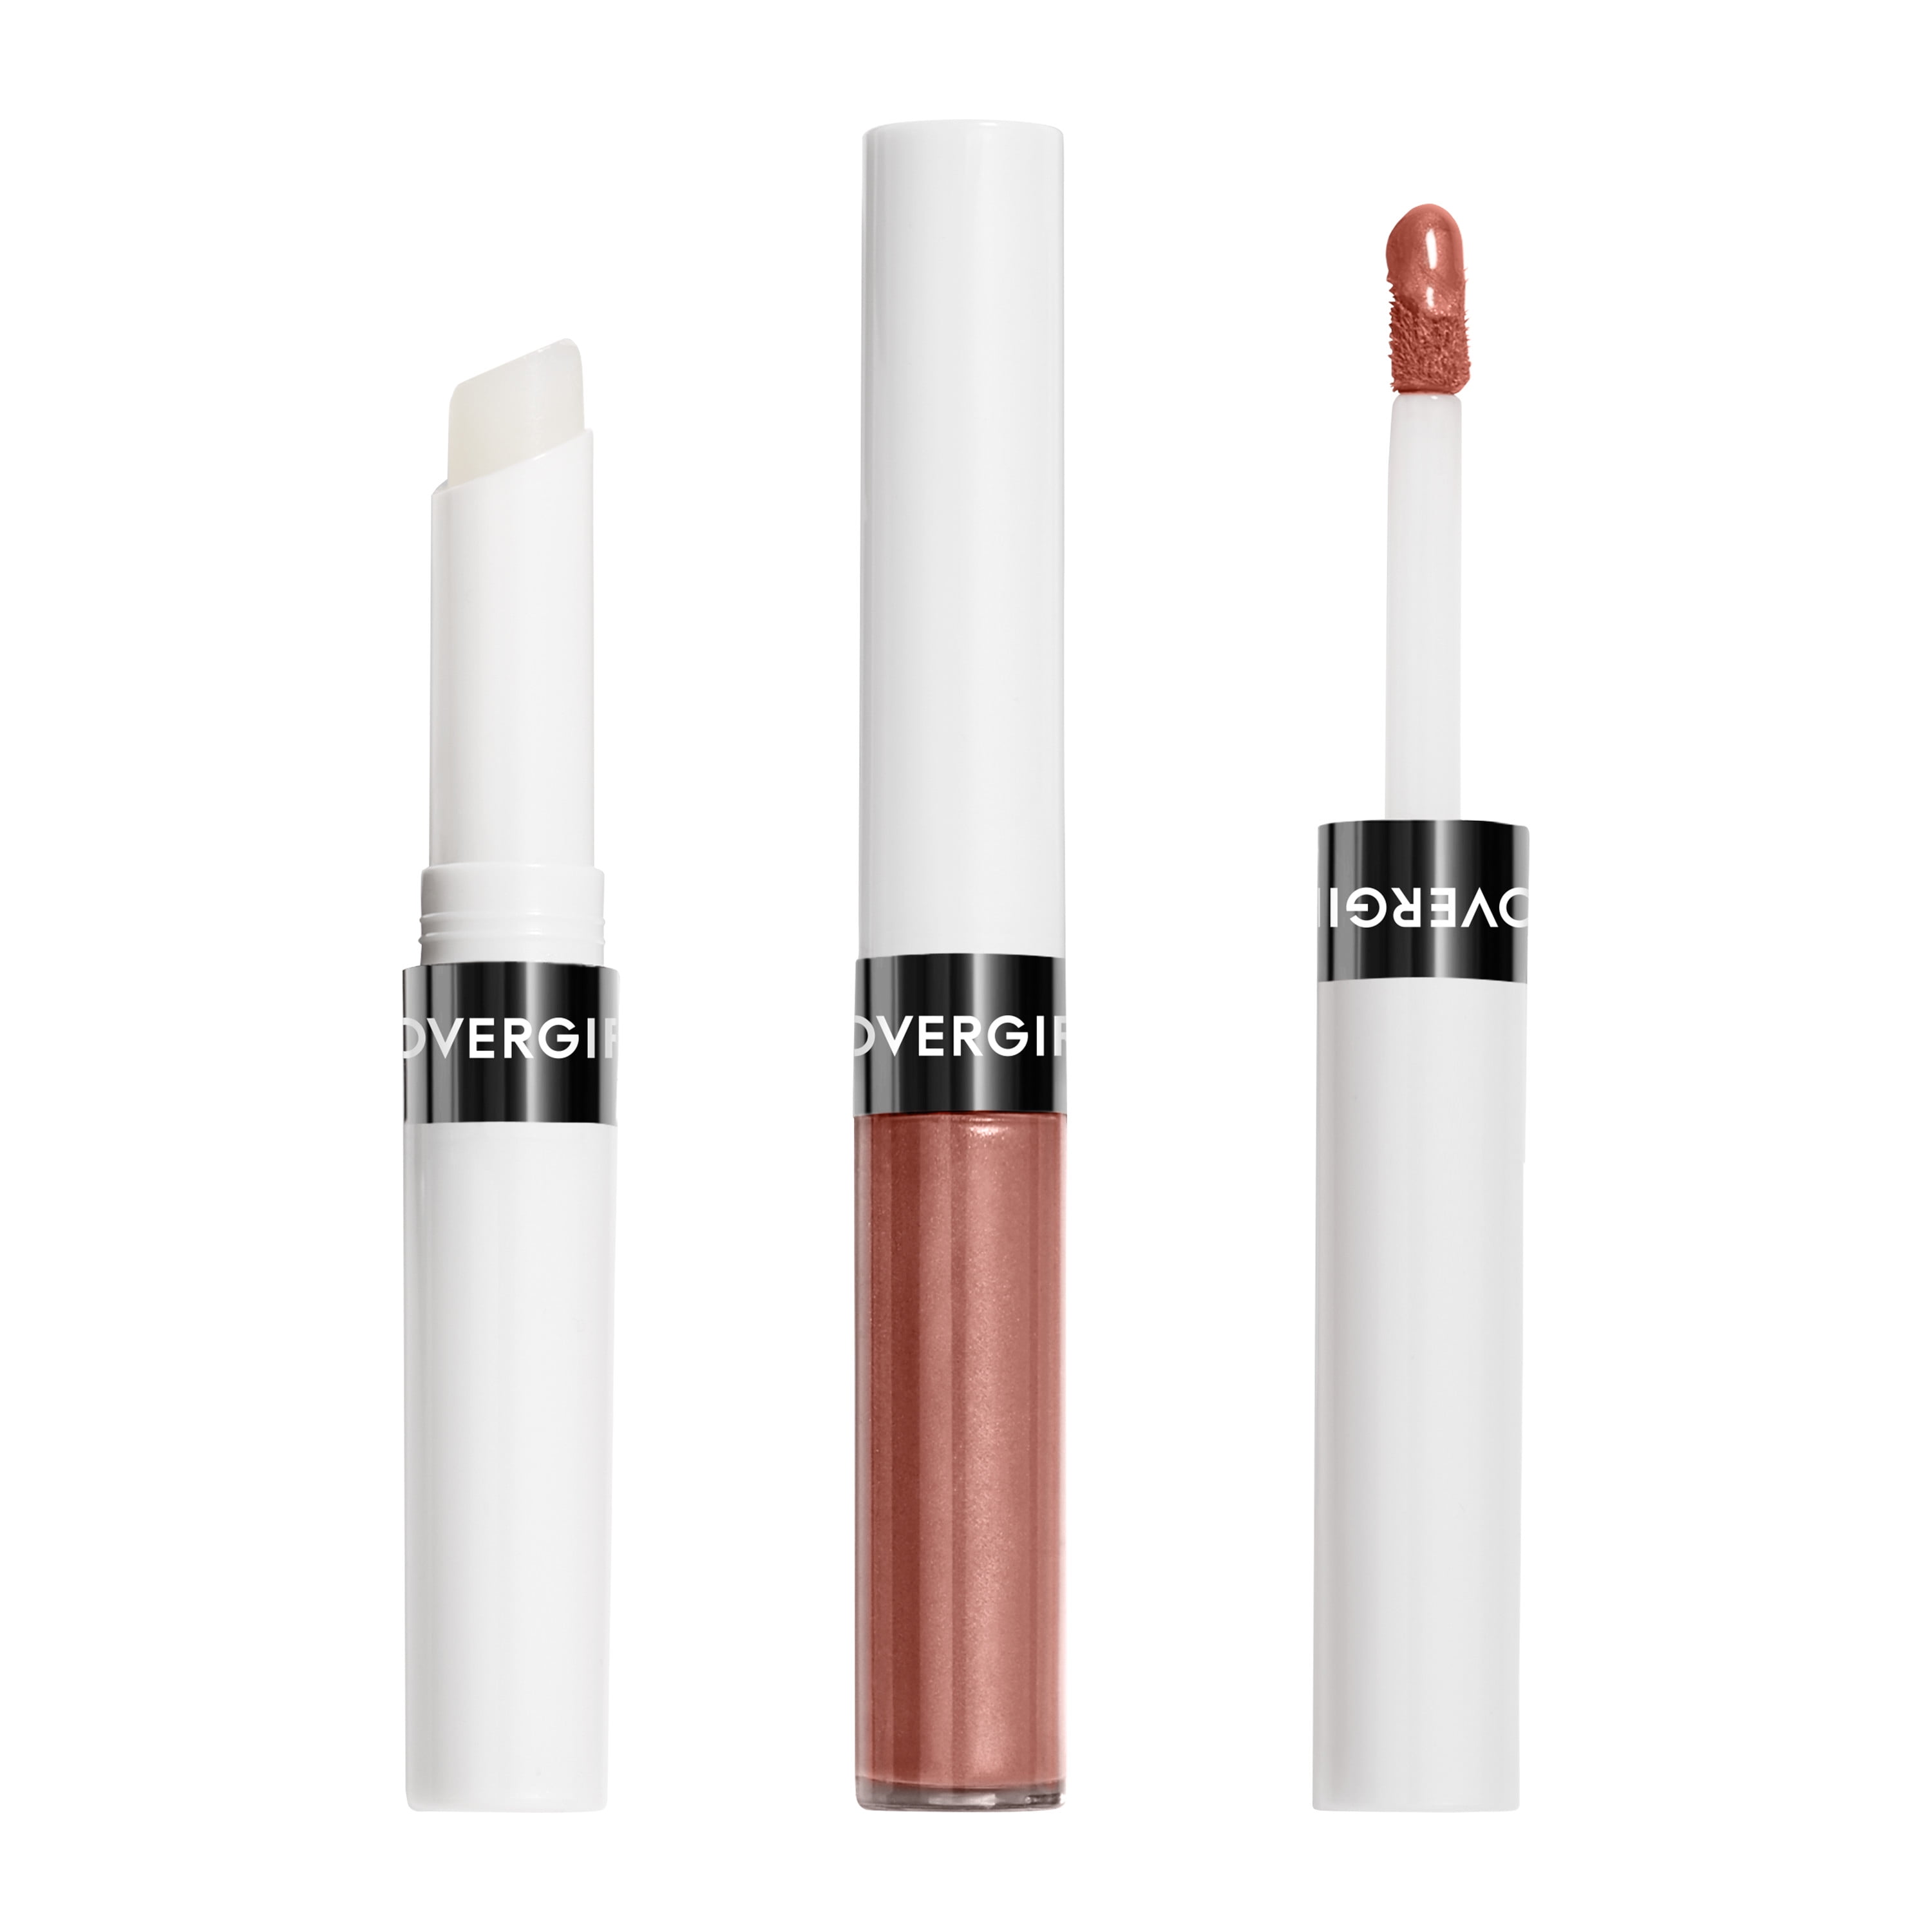 COVERGIRL Outlast All-Day Lip Color Liquid Lipstick and Moisturizing Topcoat, Longwear, Ripe Peach, Stays On All Day, Moisturizing Formula, Cruelty Free, Easy Two-Step Process